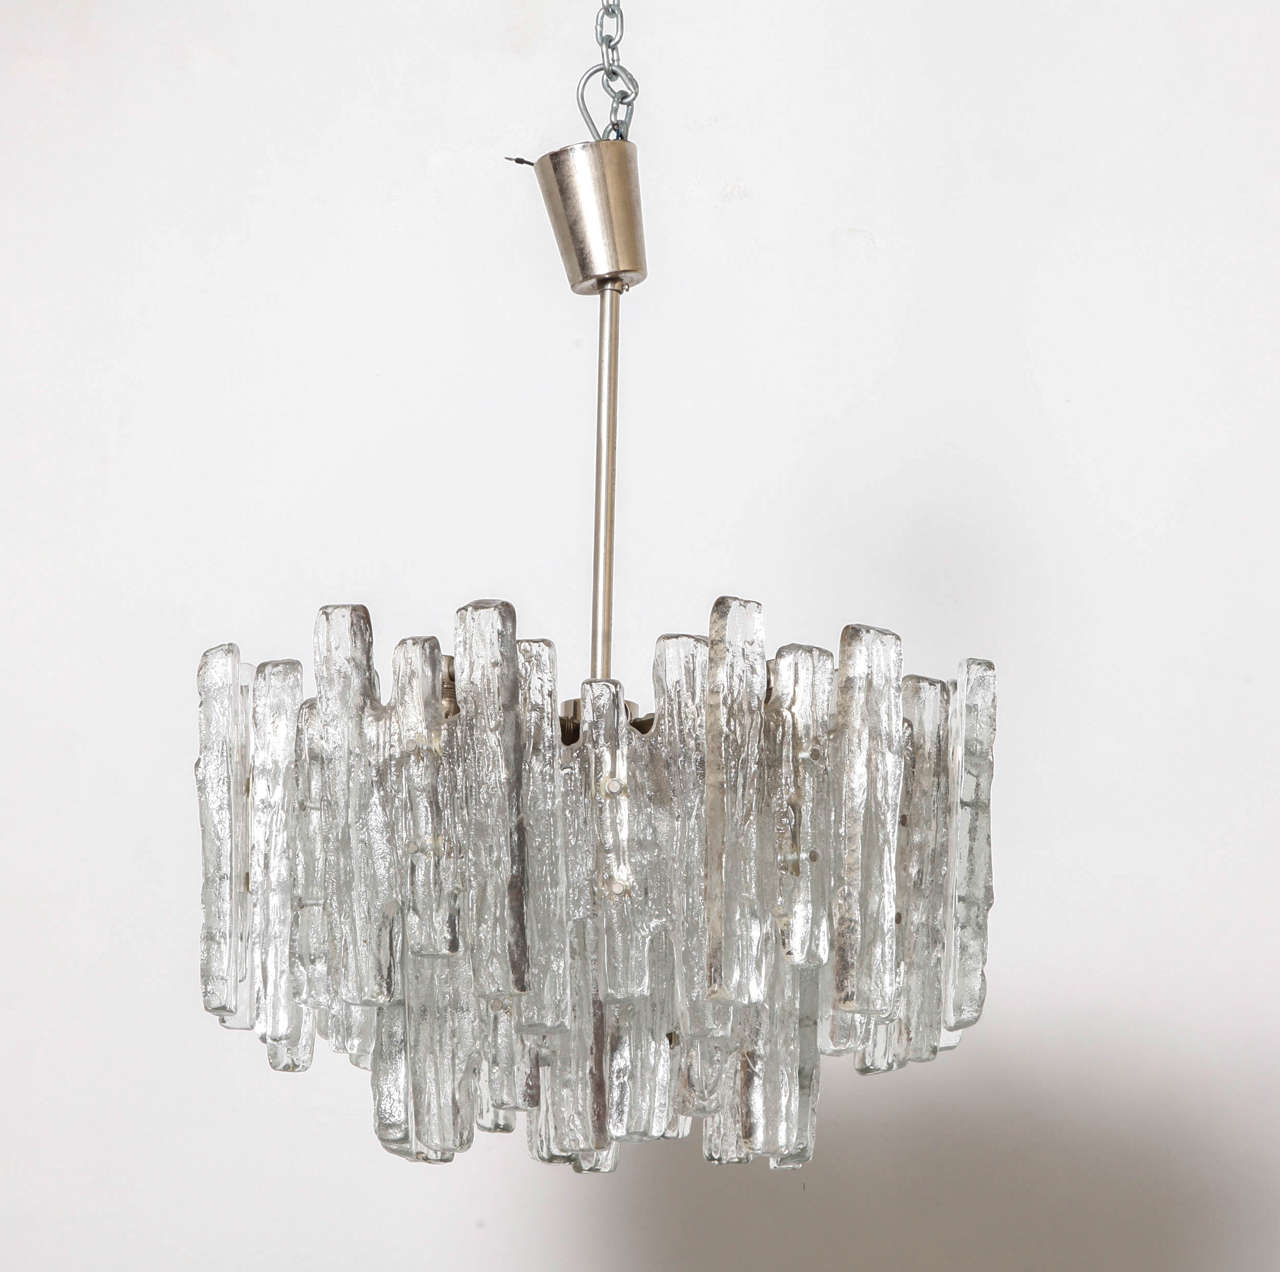 Three tiers textured ice glass chandelier, very nice light, 19 bulbs.
Two pieces available.
